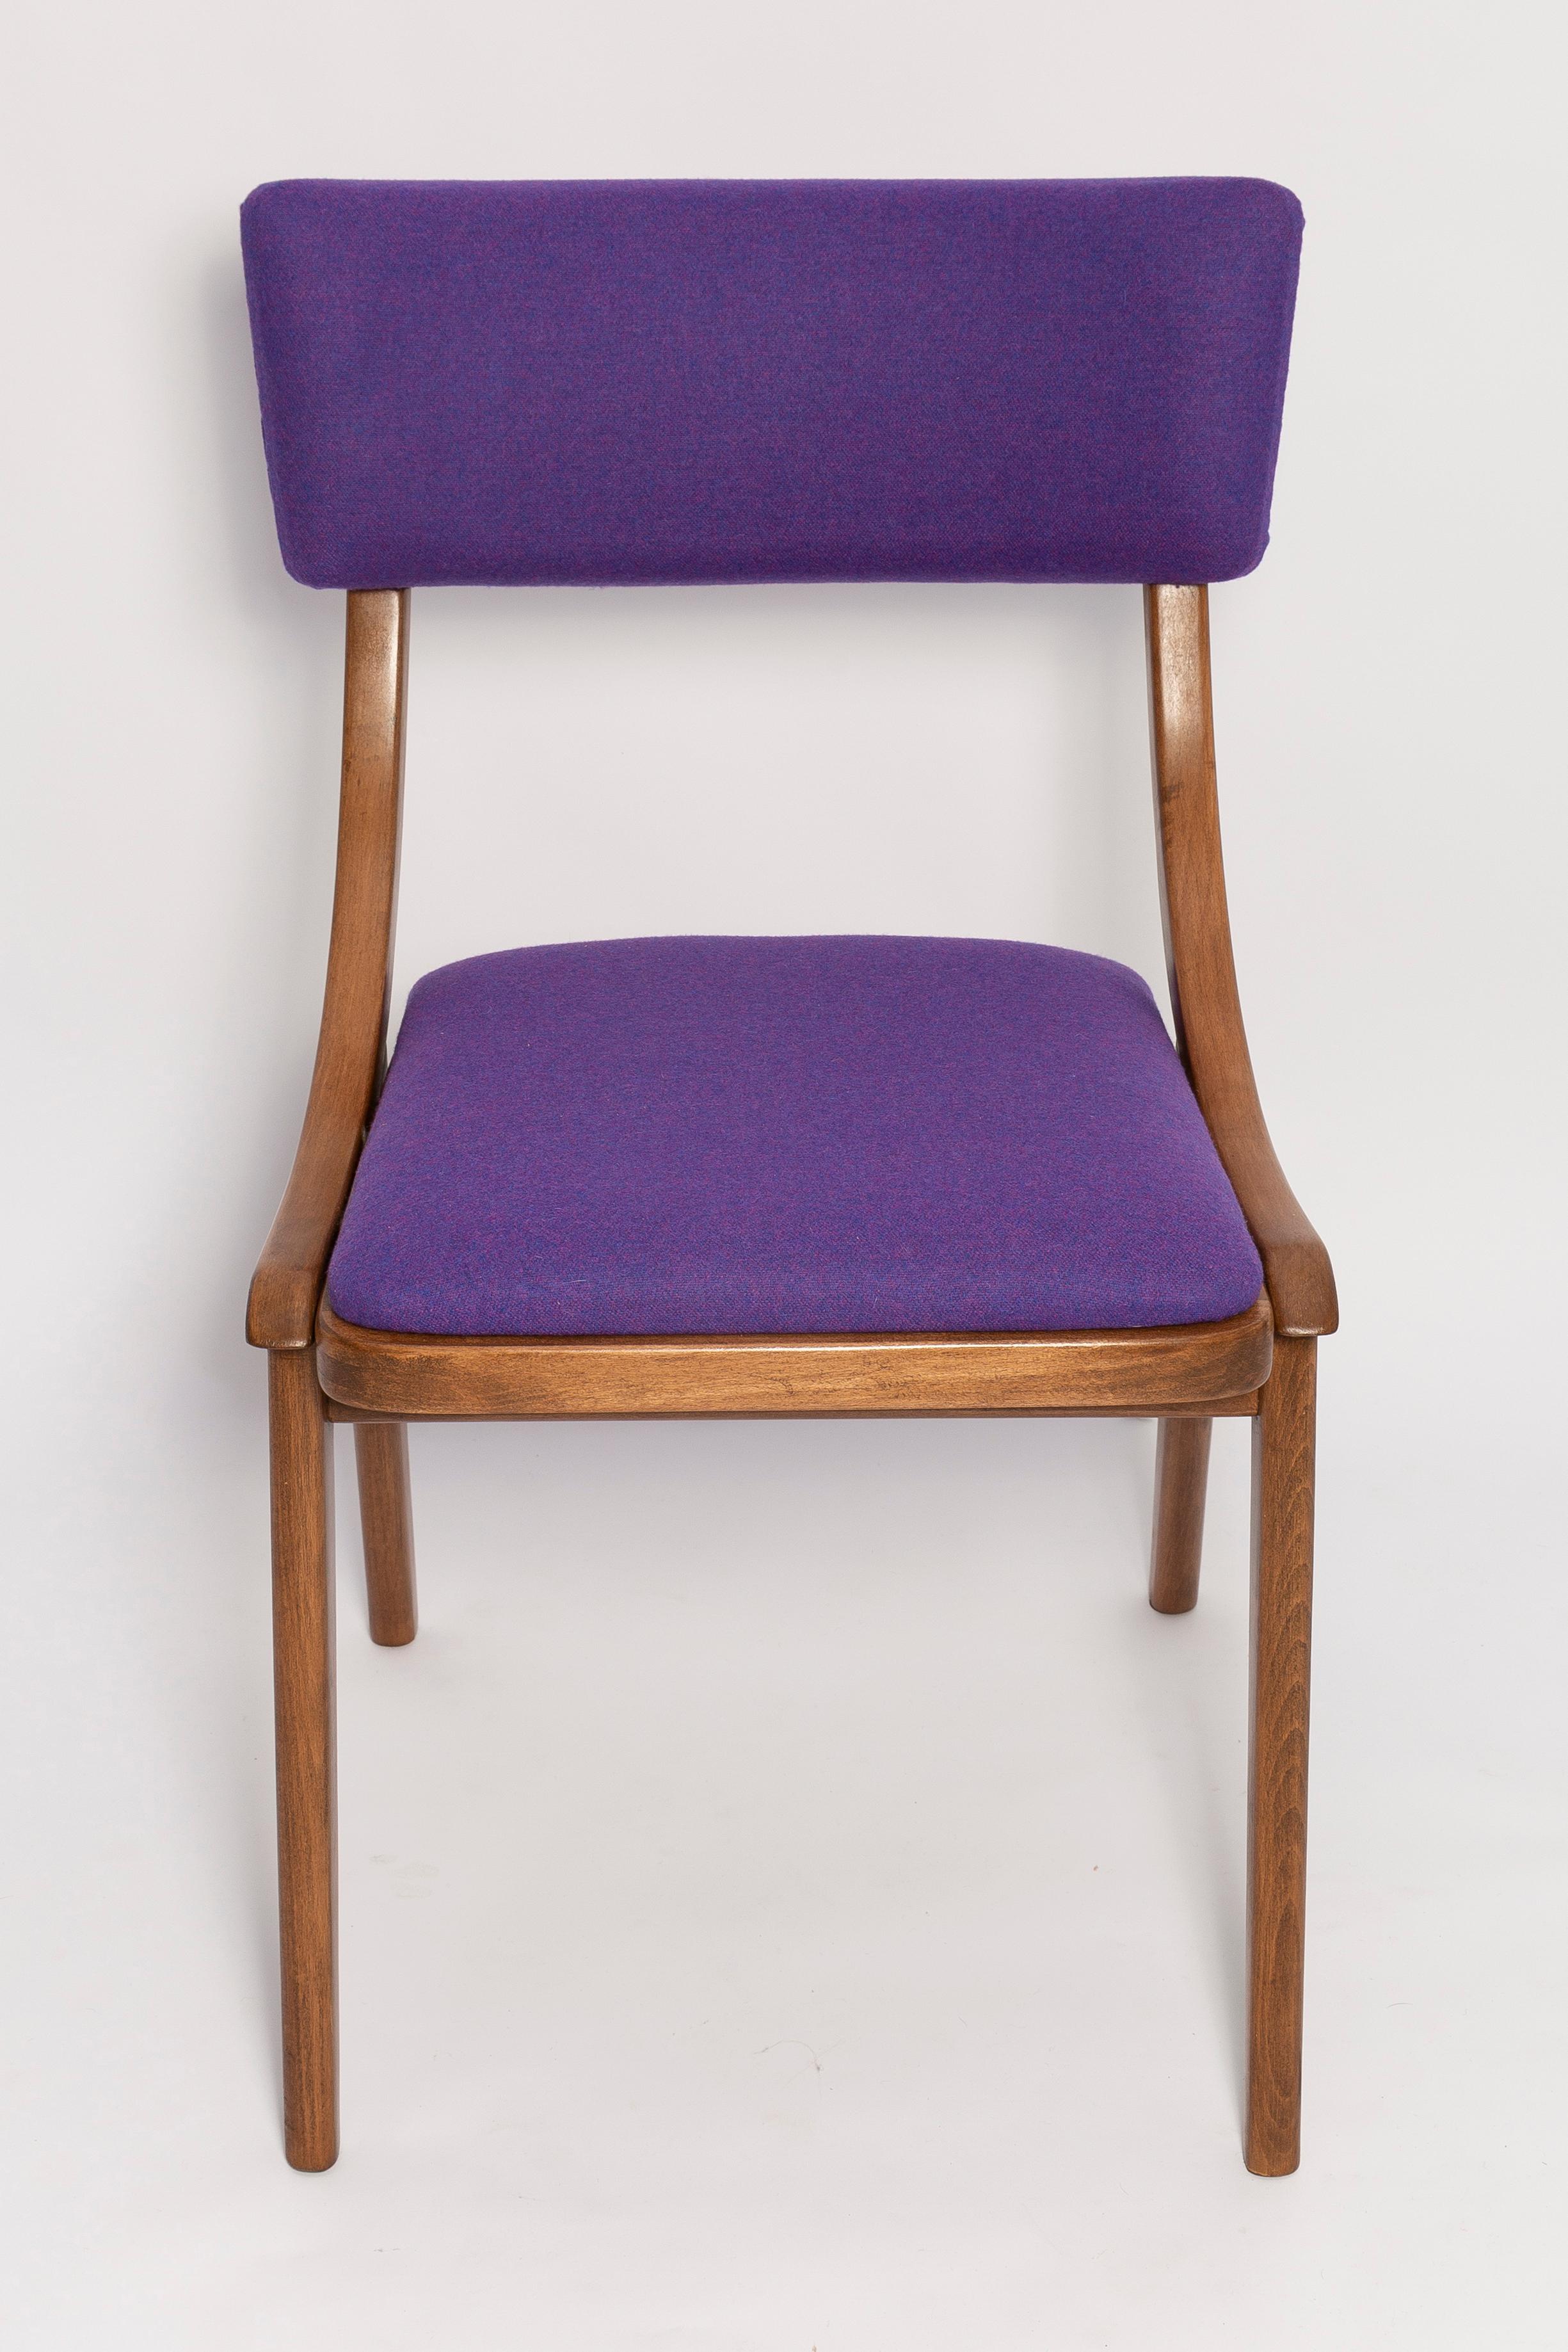 Six Mid Century Modern Bumerang Chairs, Purple Violet Wool, Poland, 1960s For Sale 2